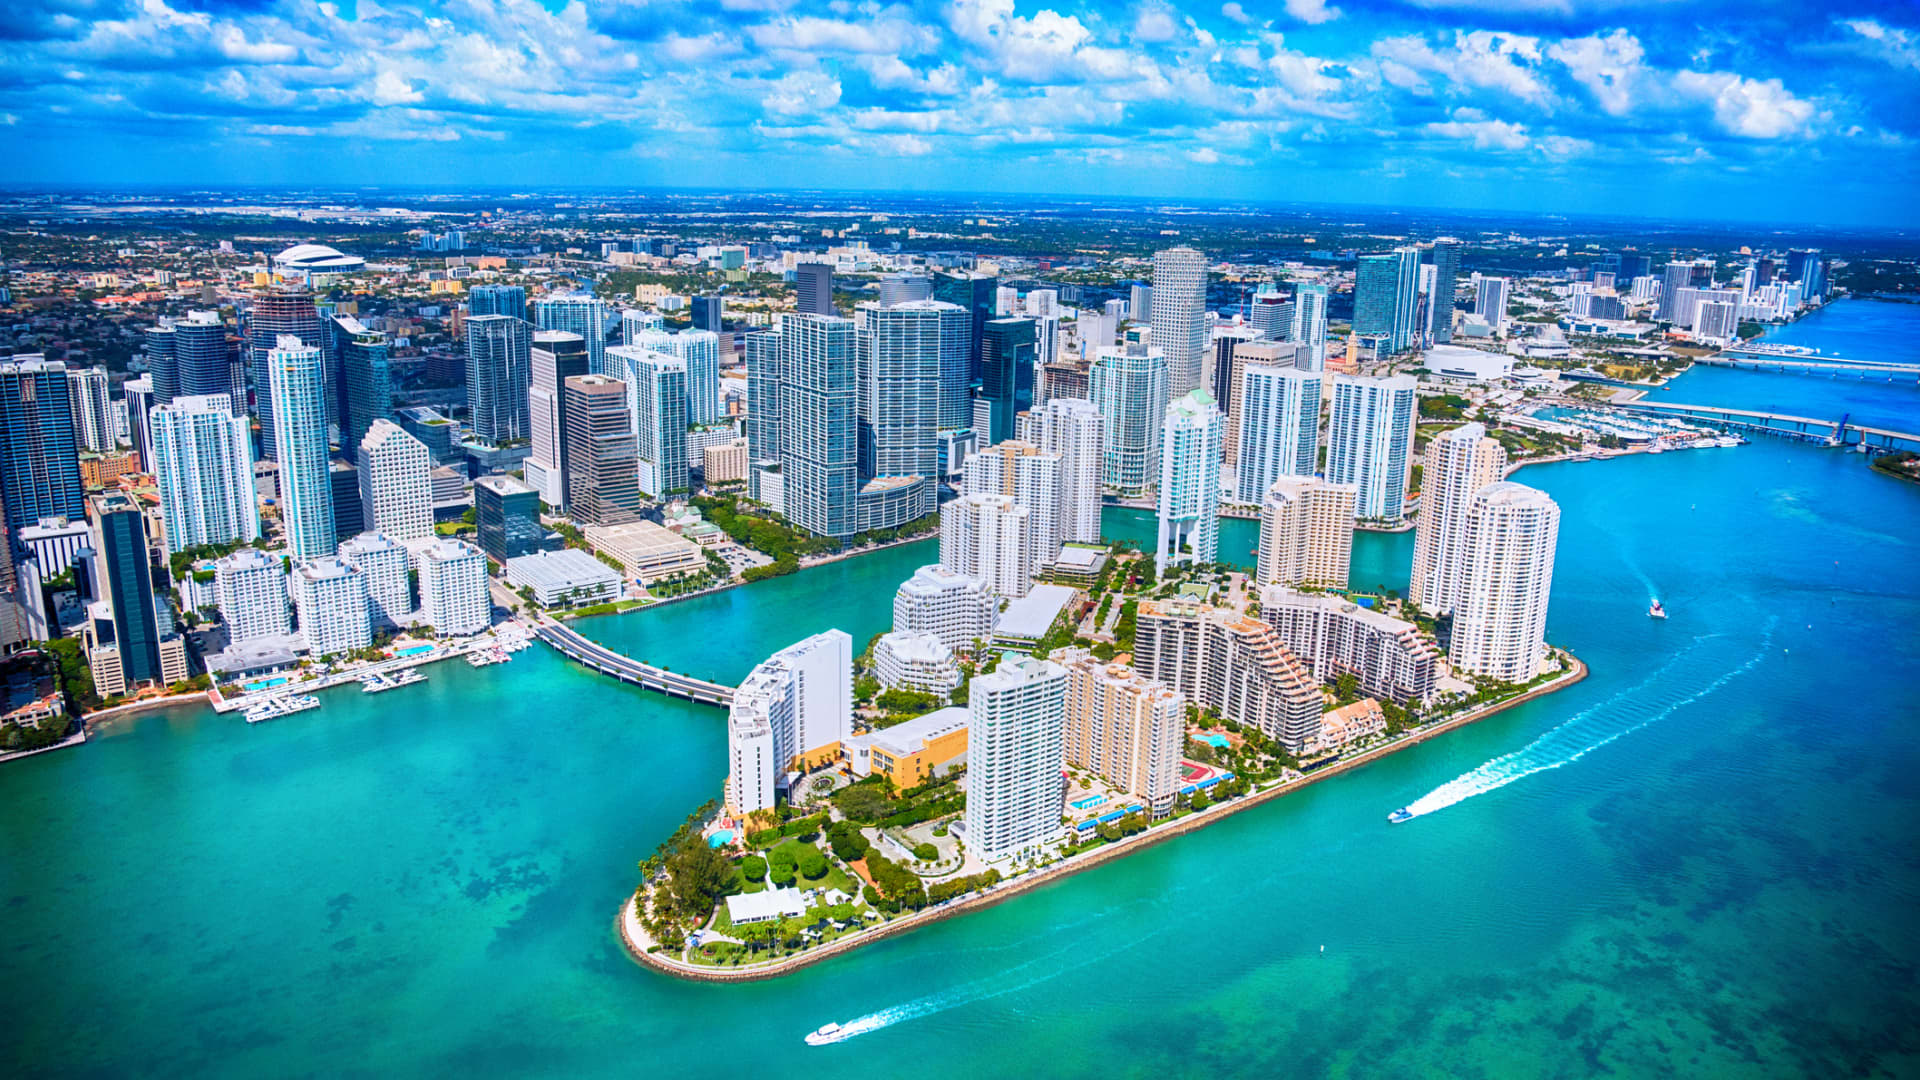 Miami is the least affordable housing market in the U.S.—see which other cities made the list